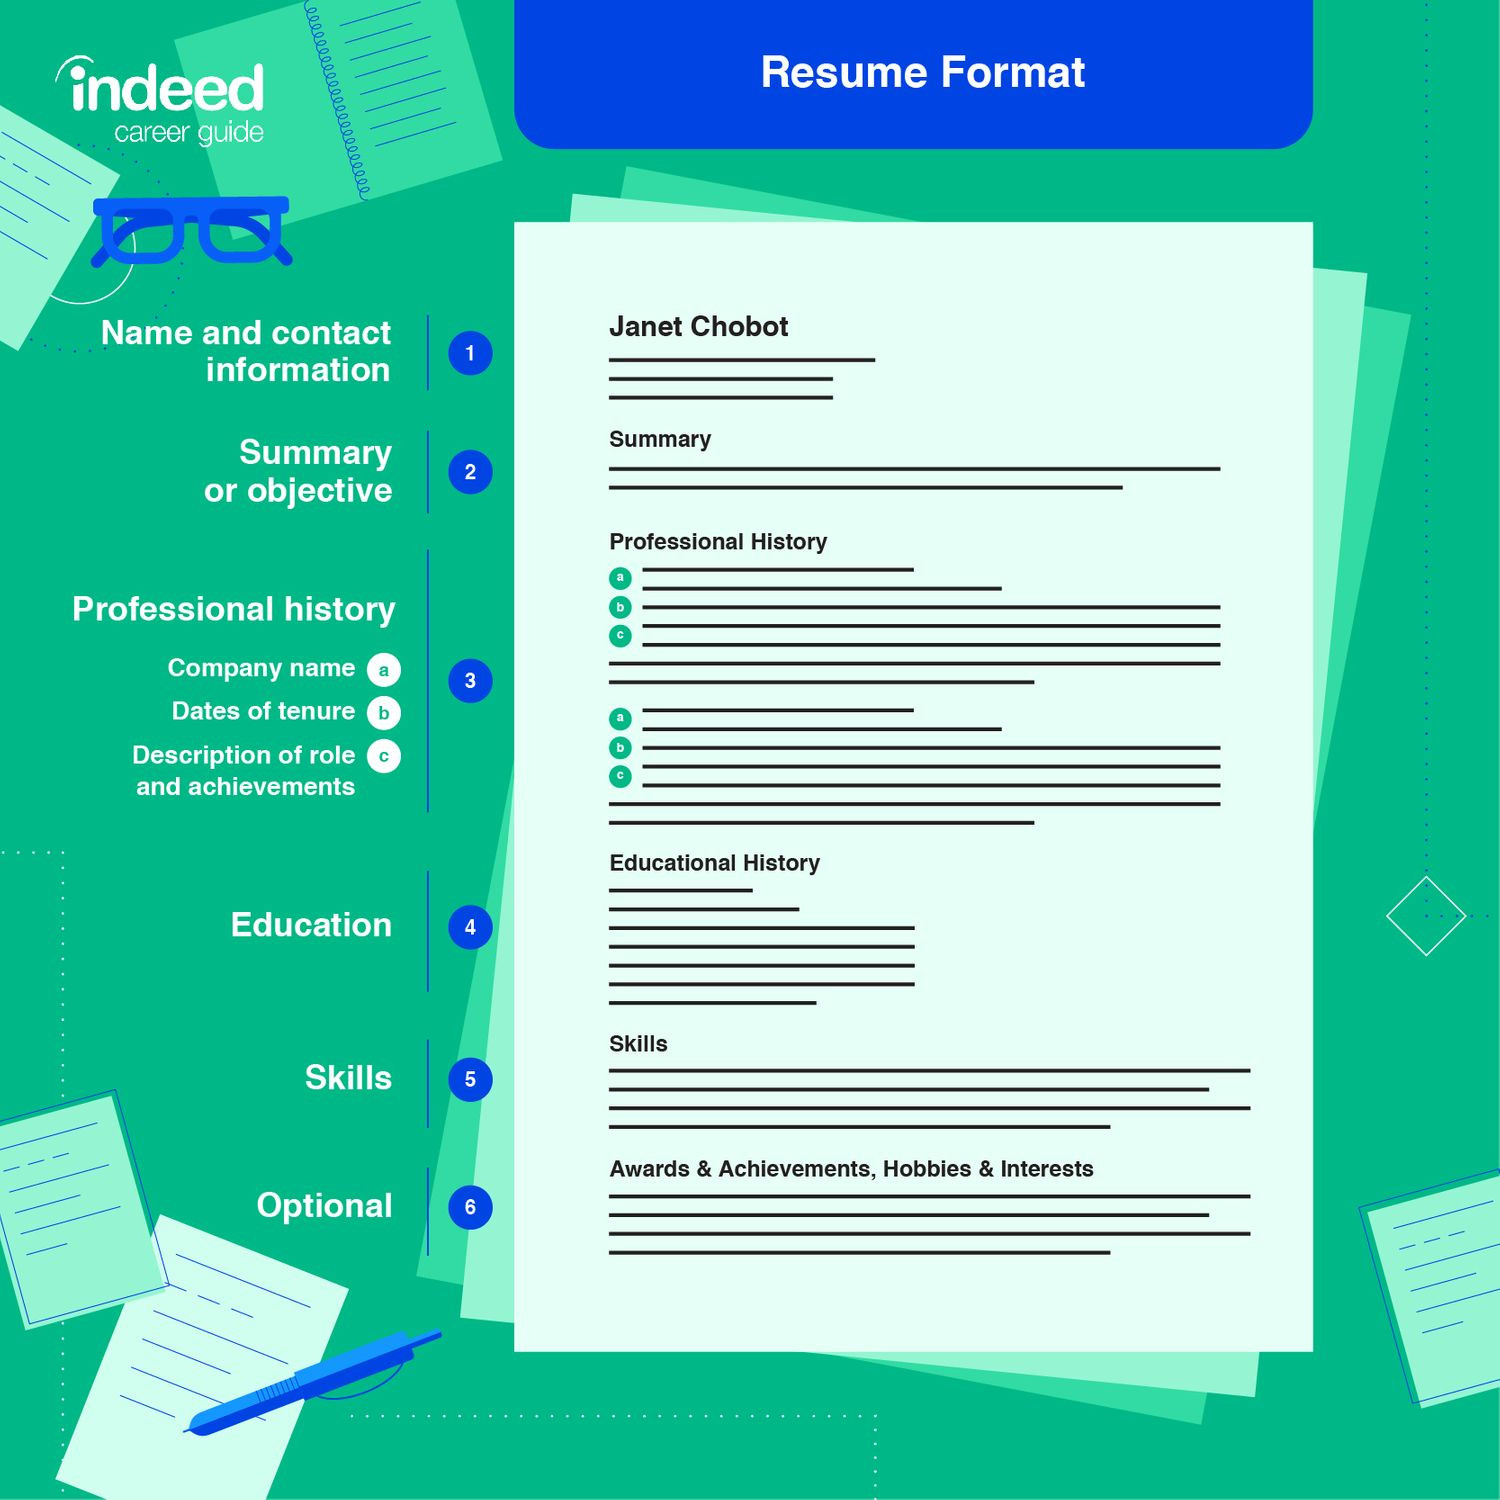 Net Developer with Main Frames Sample Indeed Resume top Resume formats: Tips and Examples Of 3 Common Resumes Indeed.com